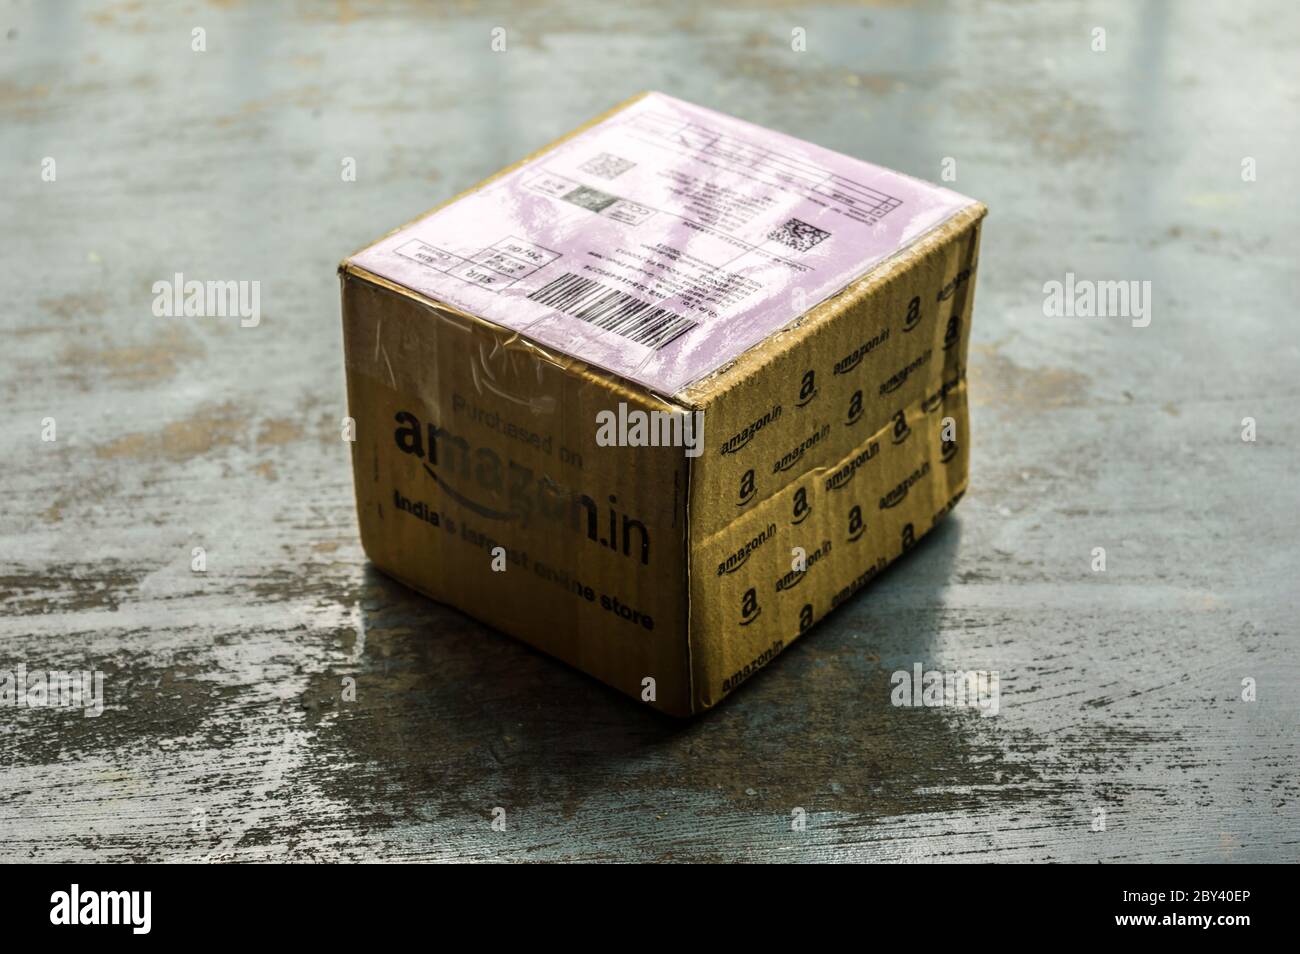 Close-up Amazon Prime package box unpacked after delivery on Amazon Prime Day. Amazon Logo printed on Amazon delivery box. Kolkata India South Asia Pa Stock Photo